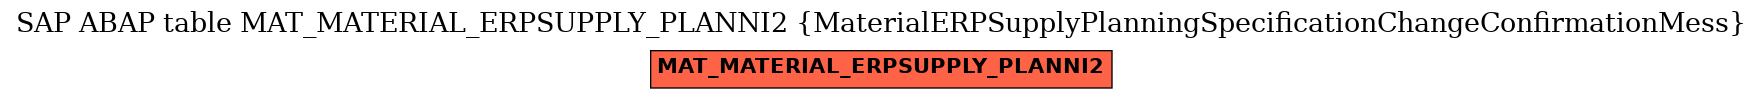 E-R Diagram for table MAT_MATERIAL_ERPSUPPLY_PLANNI2 (MaterialERPSupplyPlanningSpecificationChangeConfirmationMess)